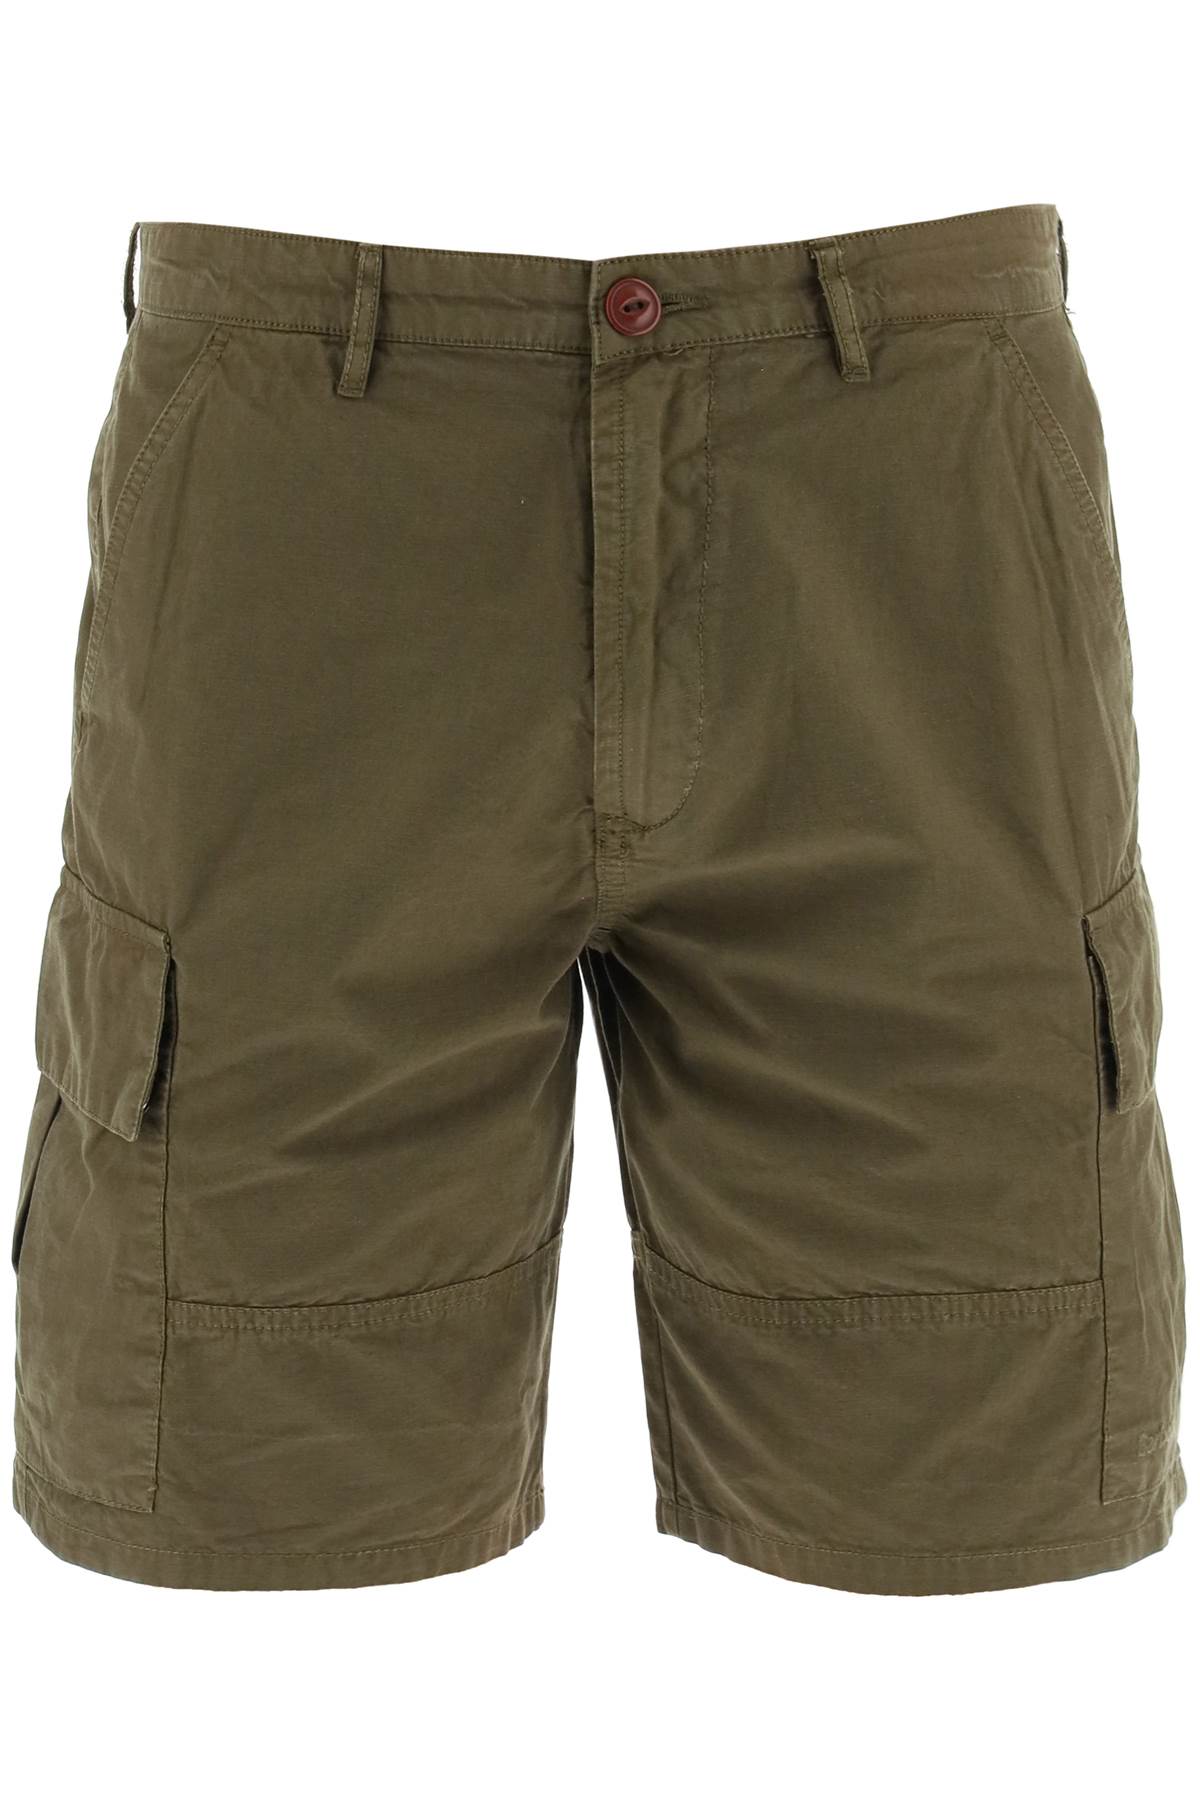 Barbour cargo shorts MST0023 IVY GREEN